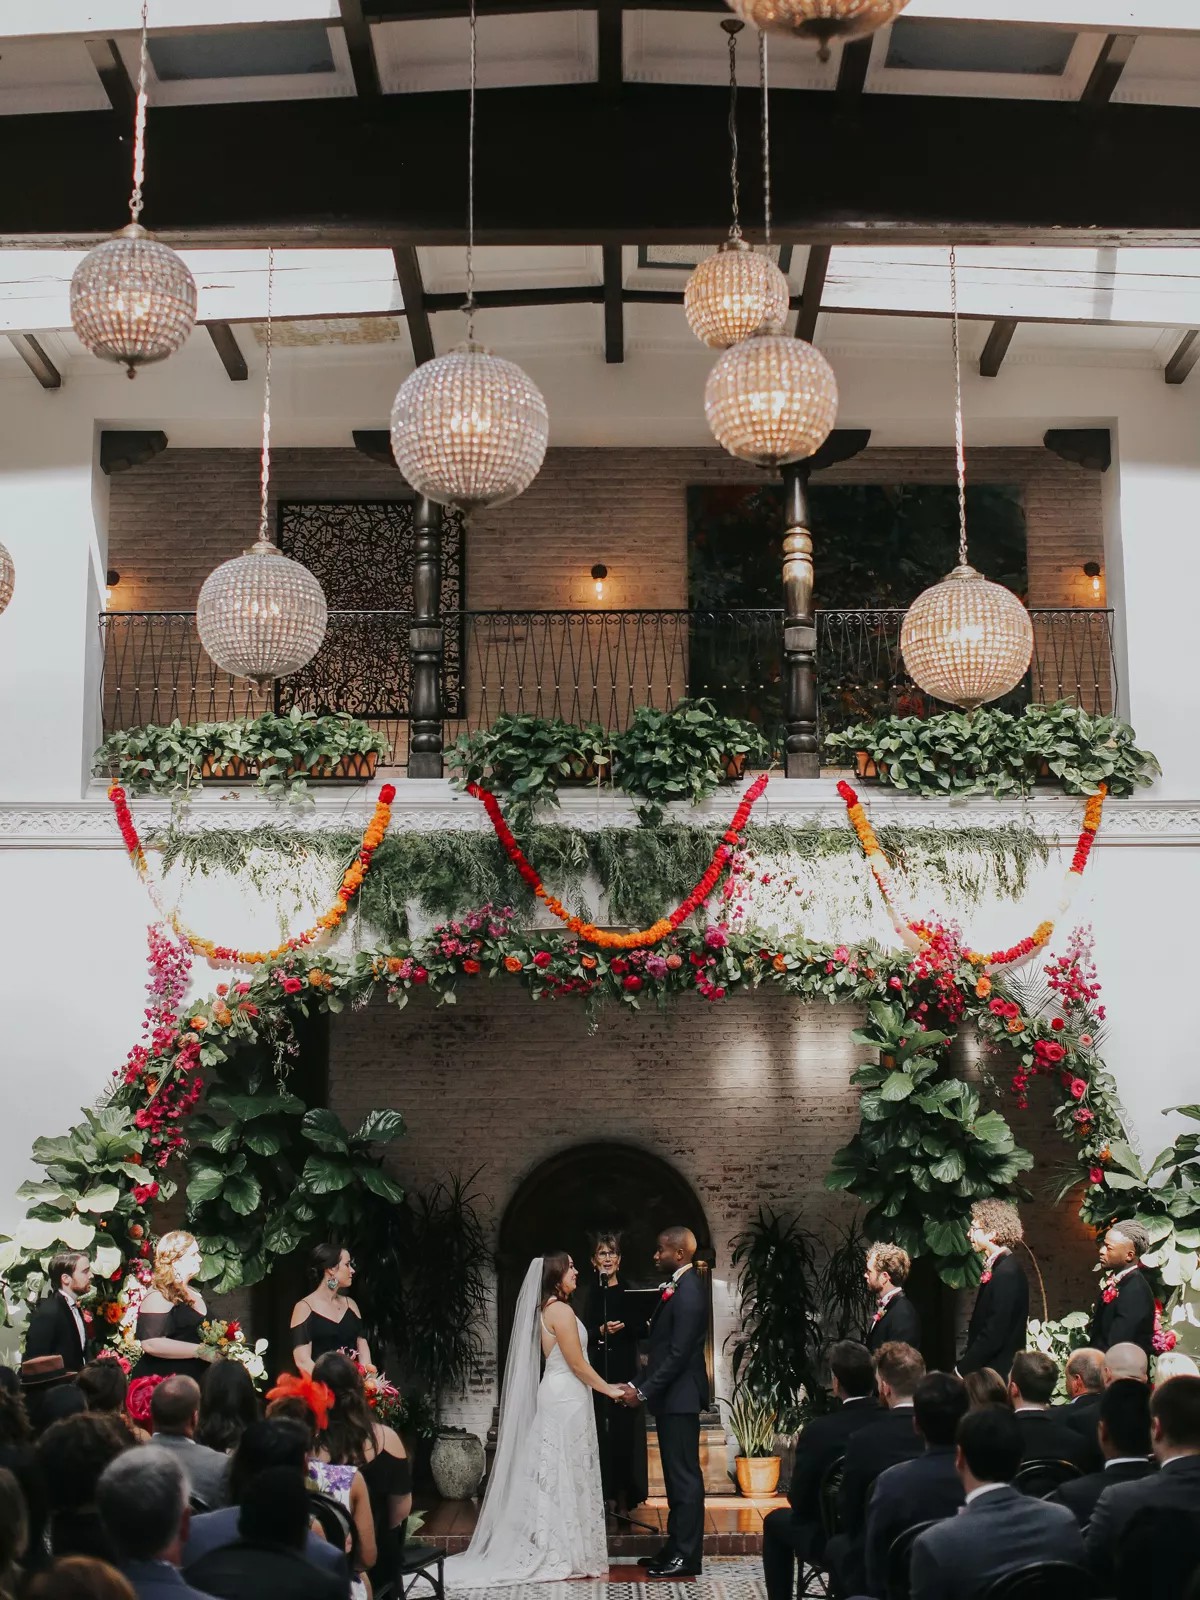 26 Fairytale Wedding Theme Ideas For Your Own Happily Ever After